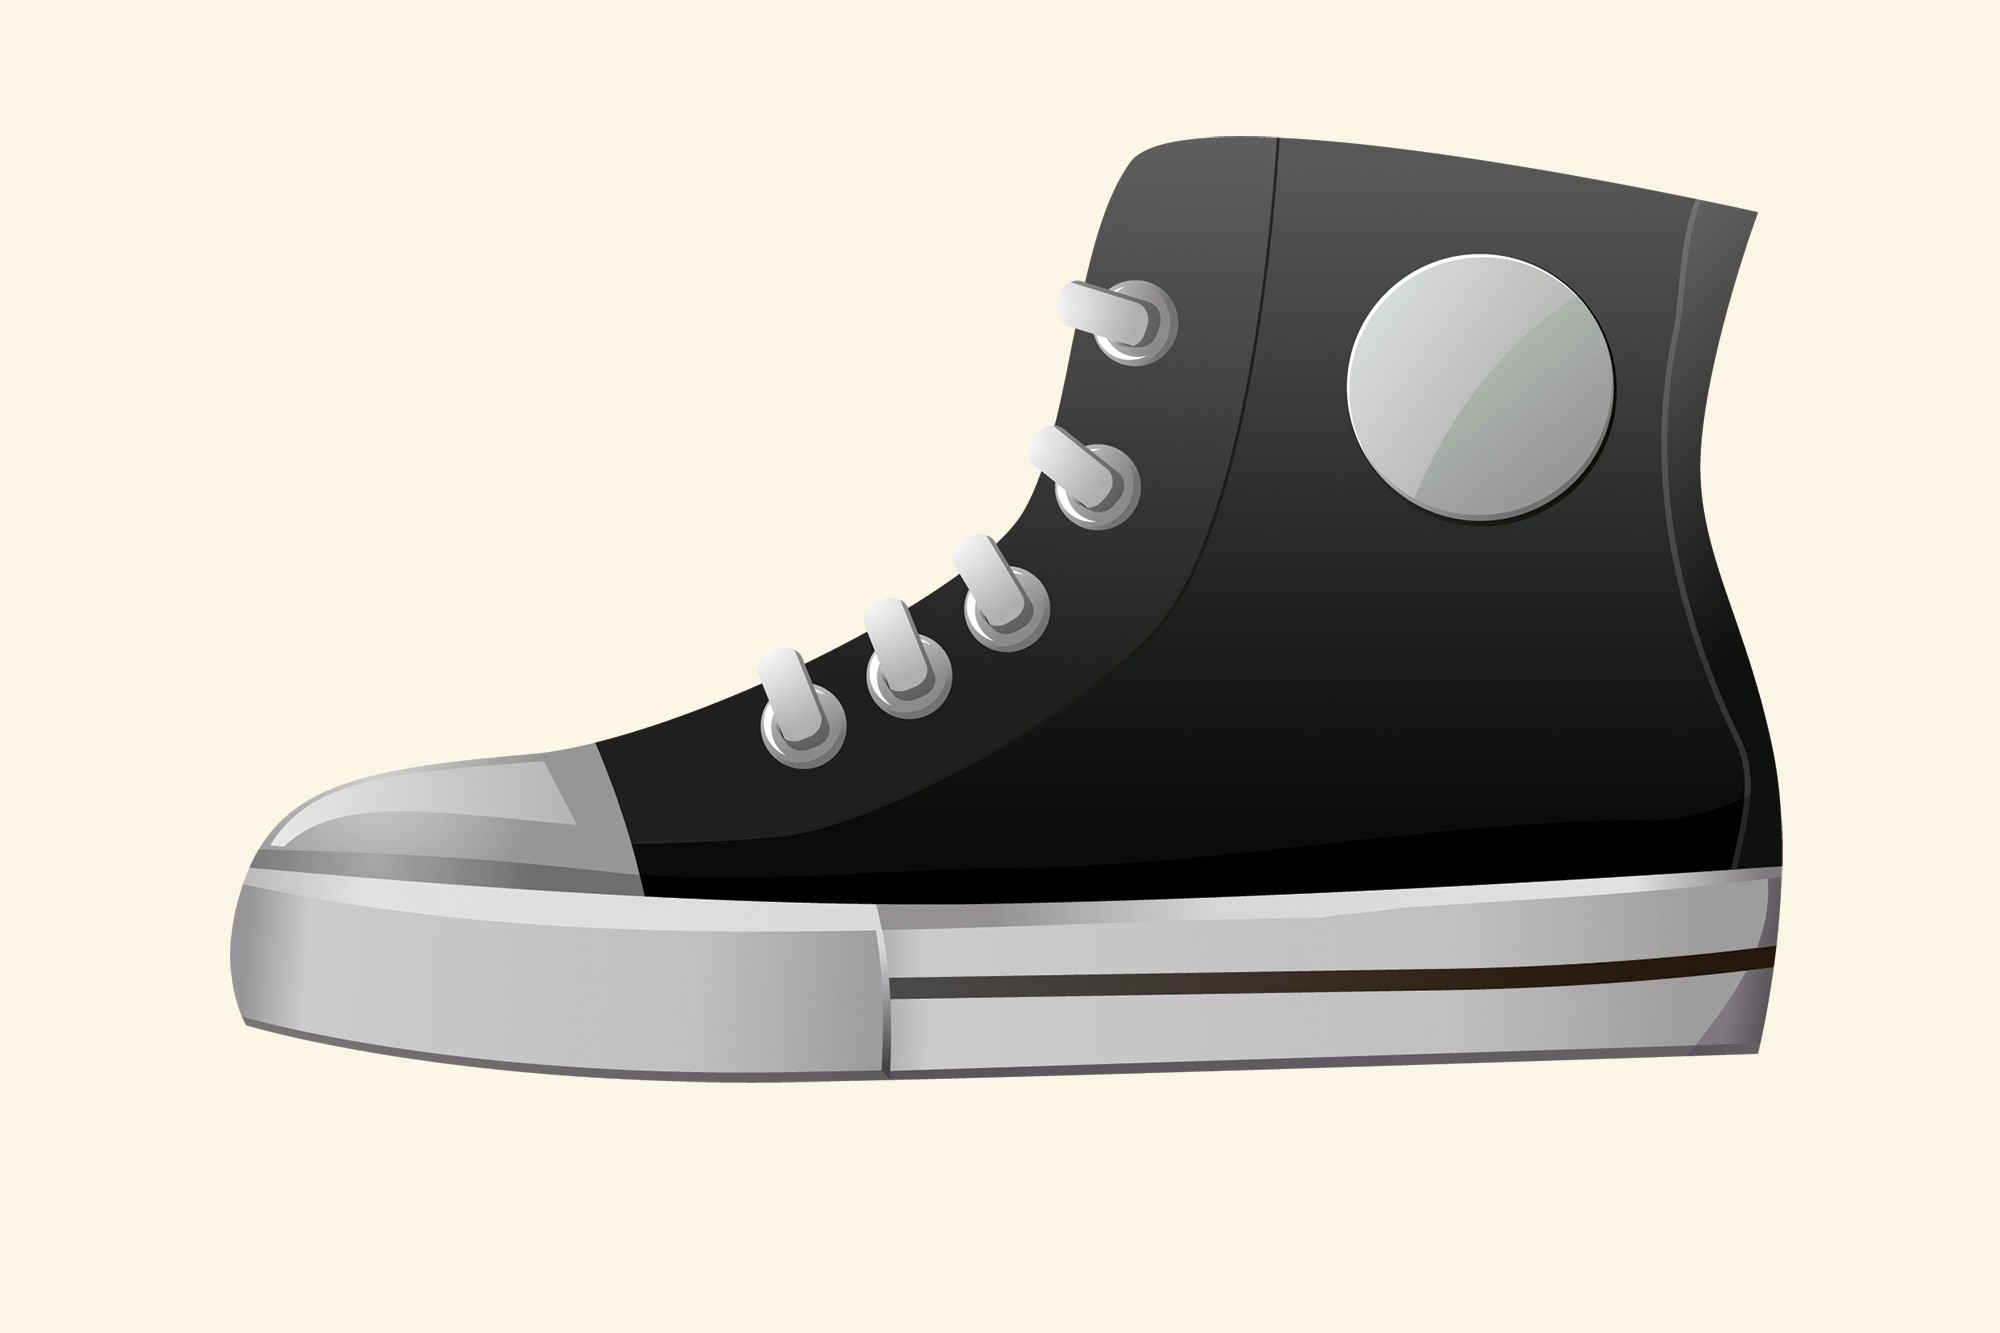 Converse-style high top sneaker